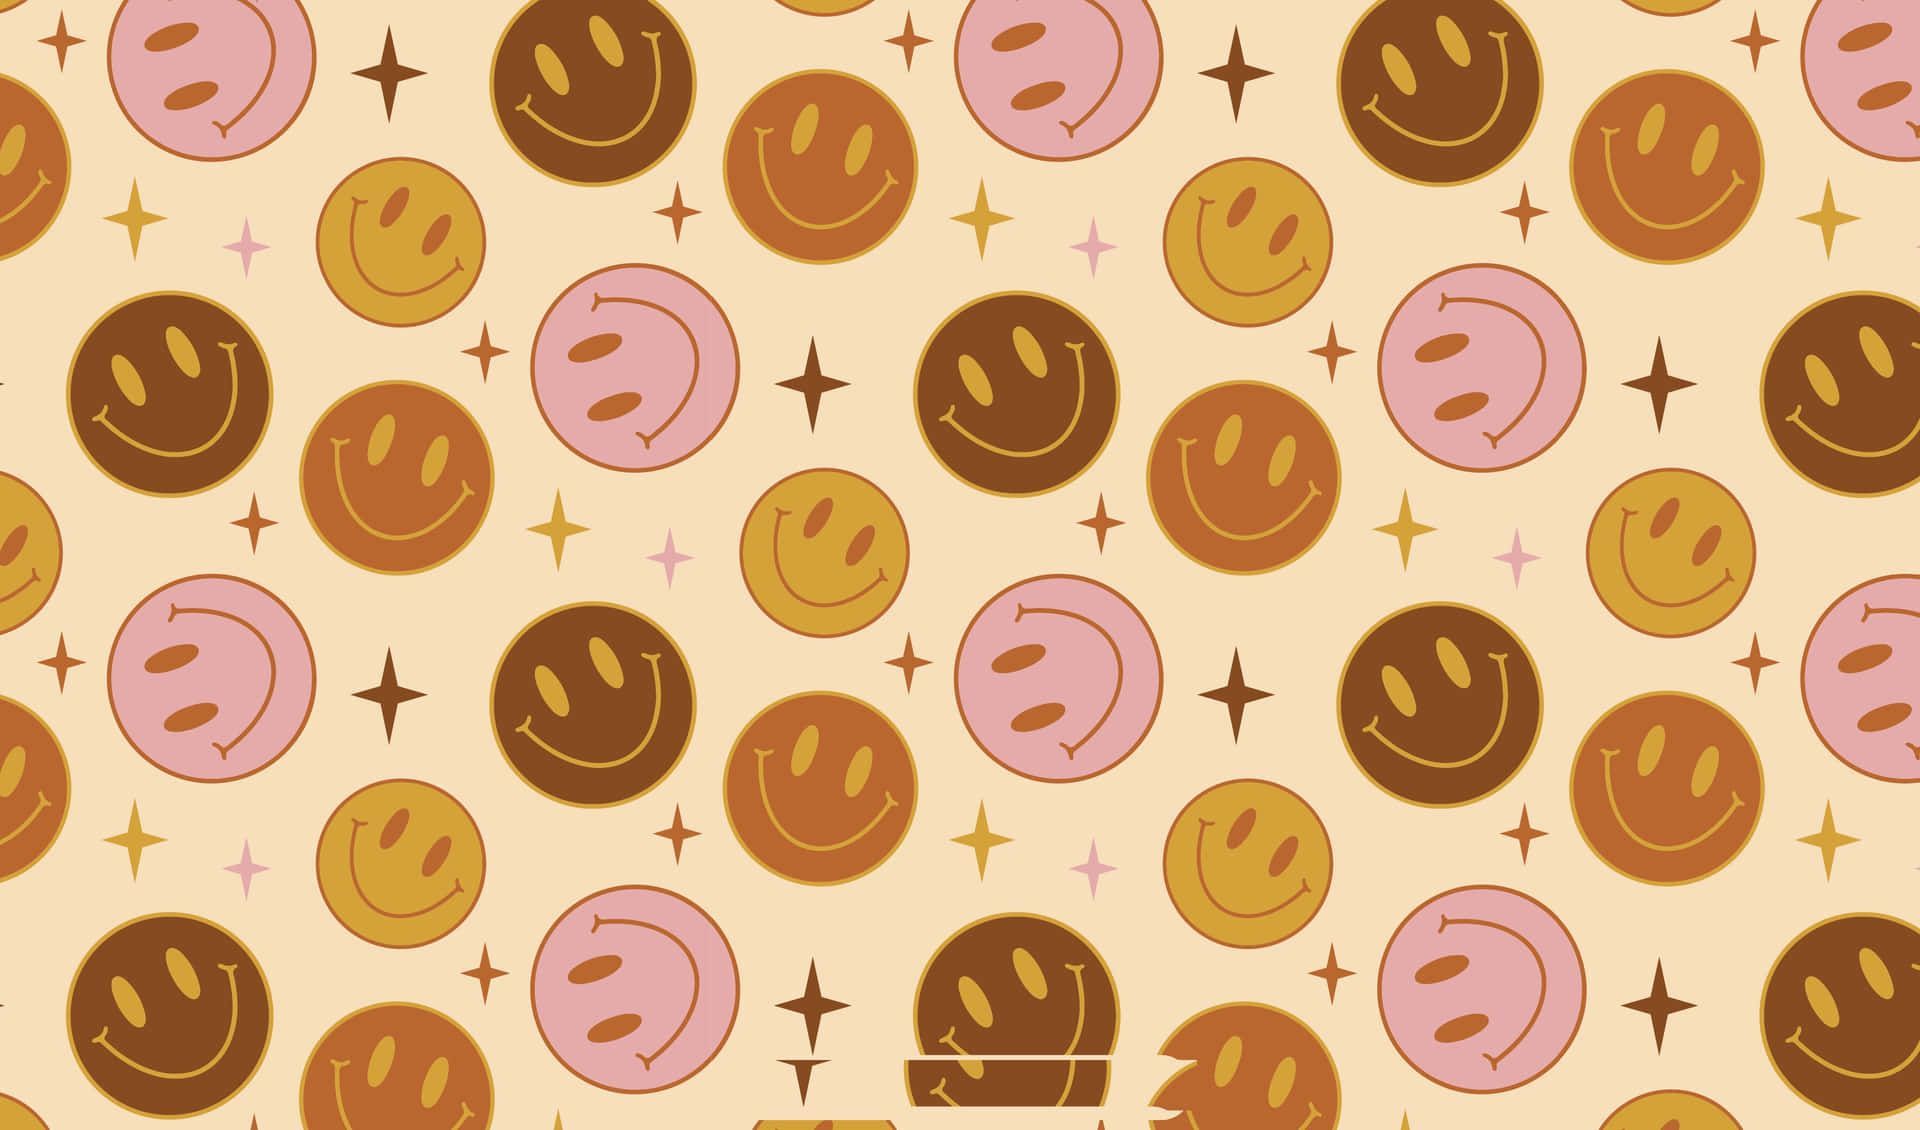 Preppy Smiley Face Background s